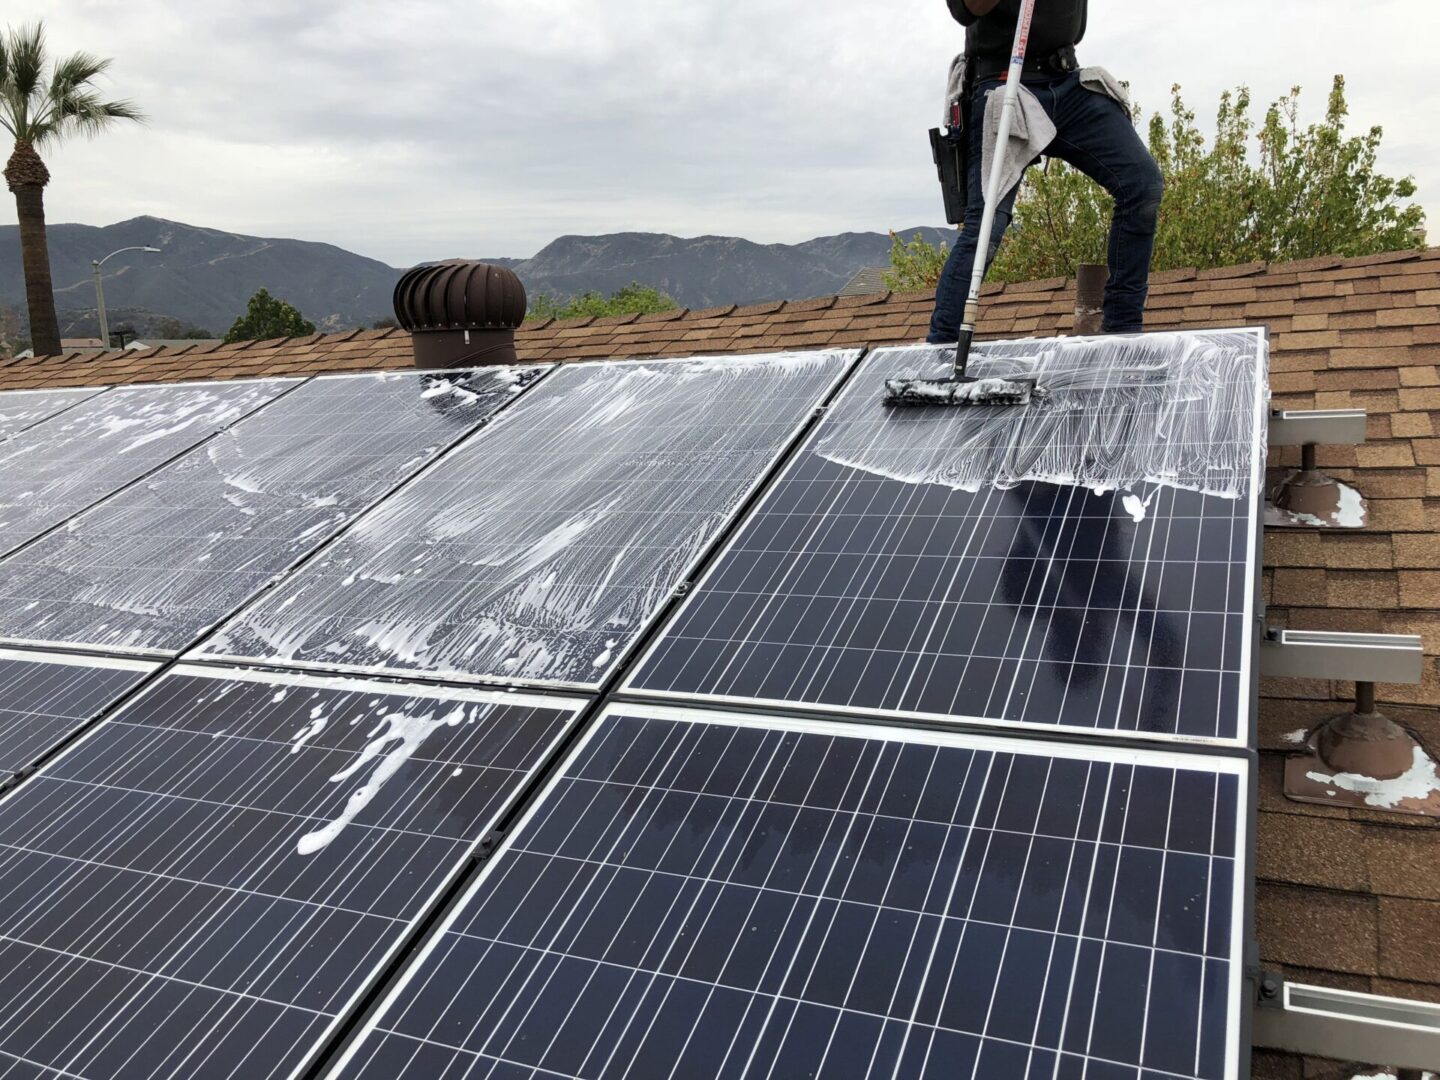 A person mopping solar panels